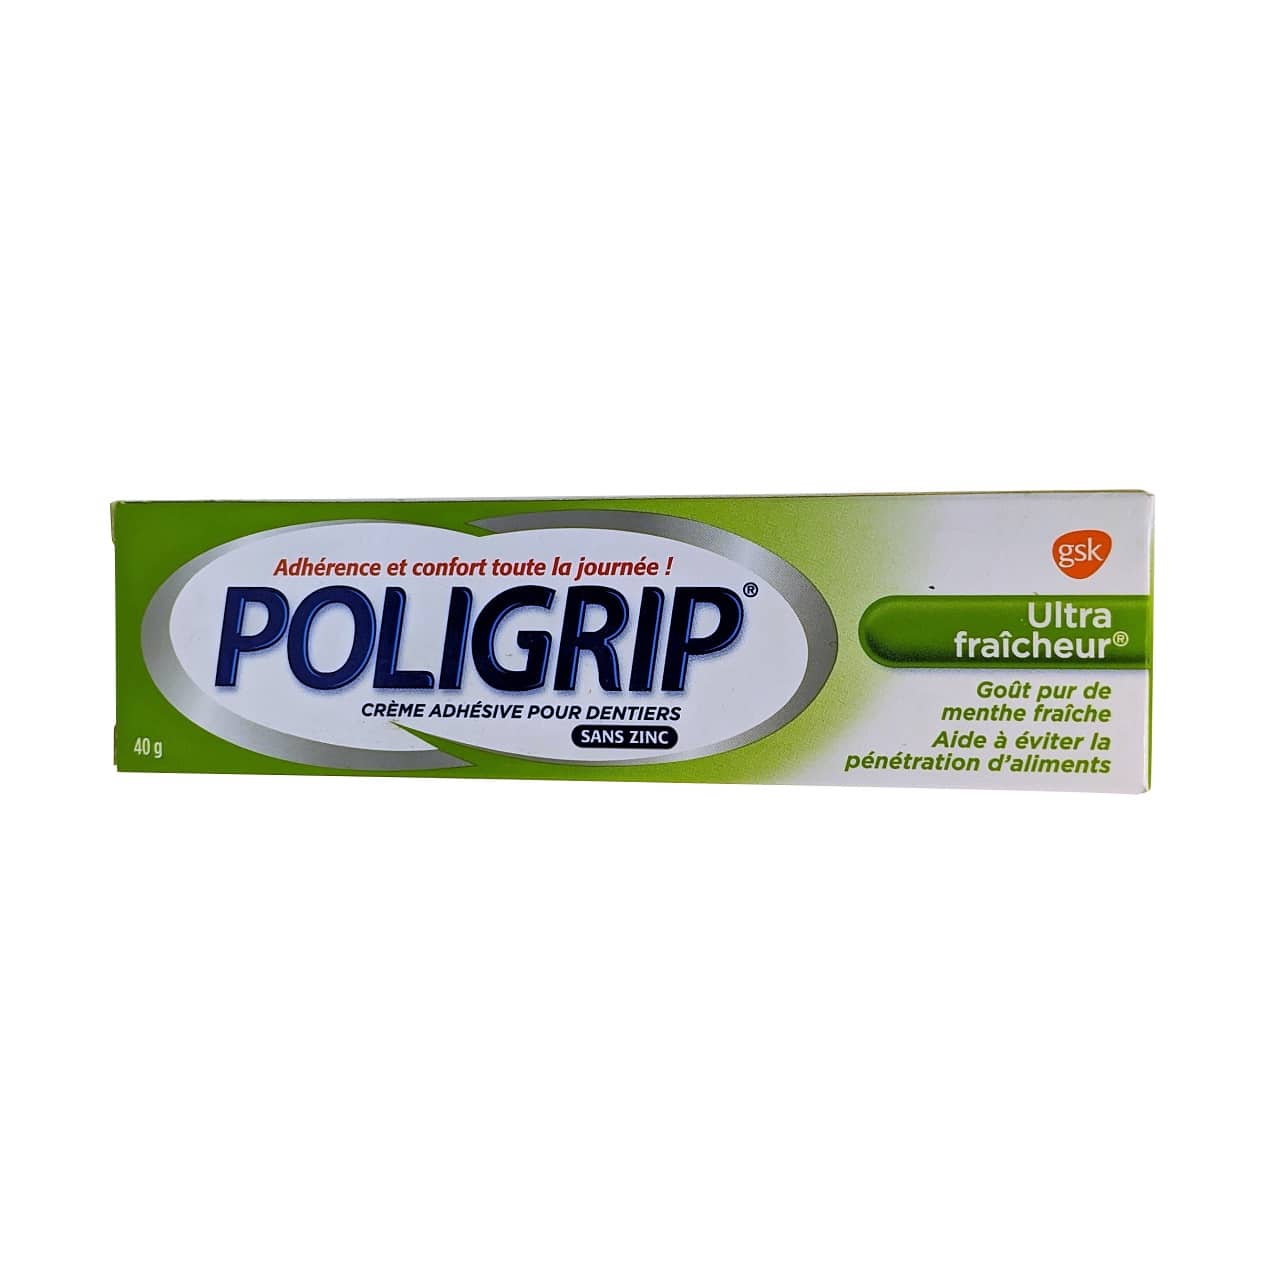 Product label for Poligrip Denture Adhesive Cream Ultra Fresh (40 grams) in French